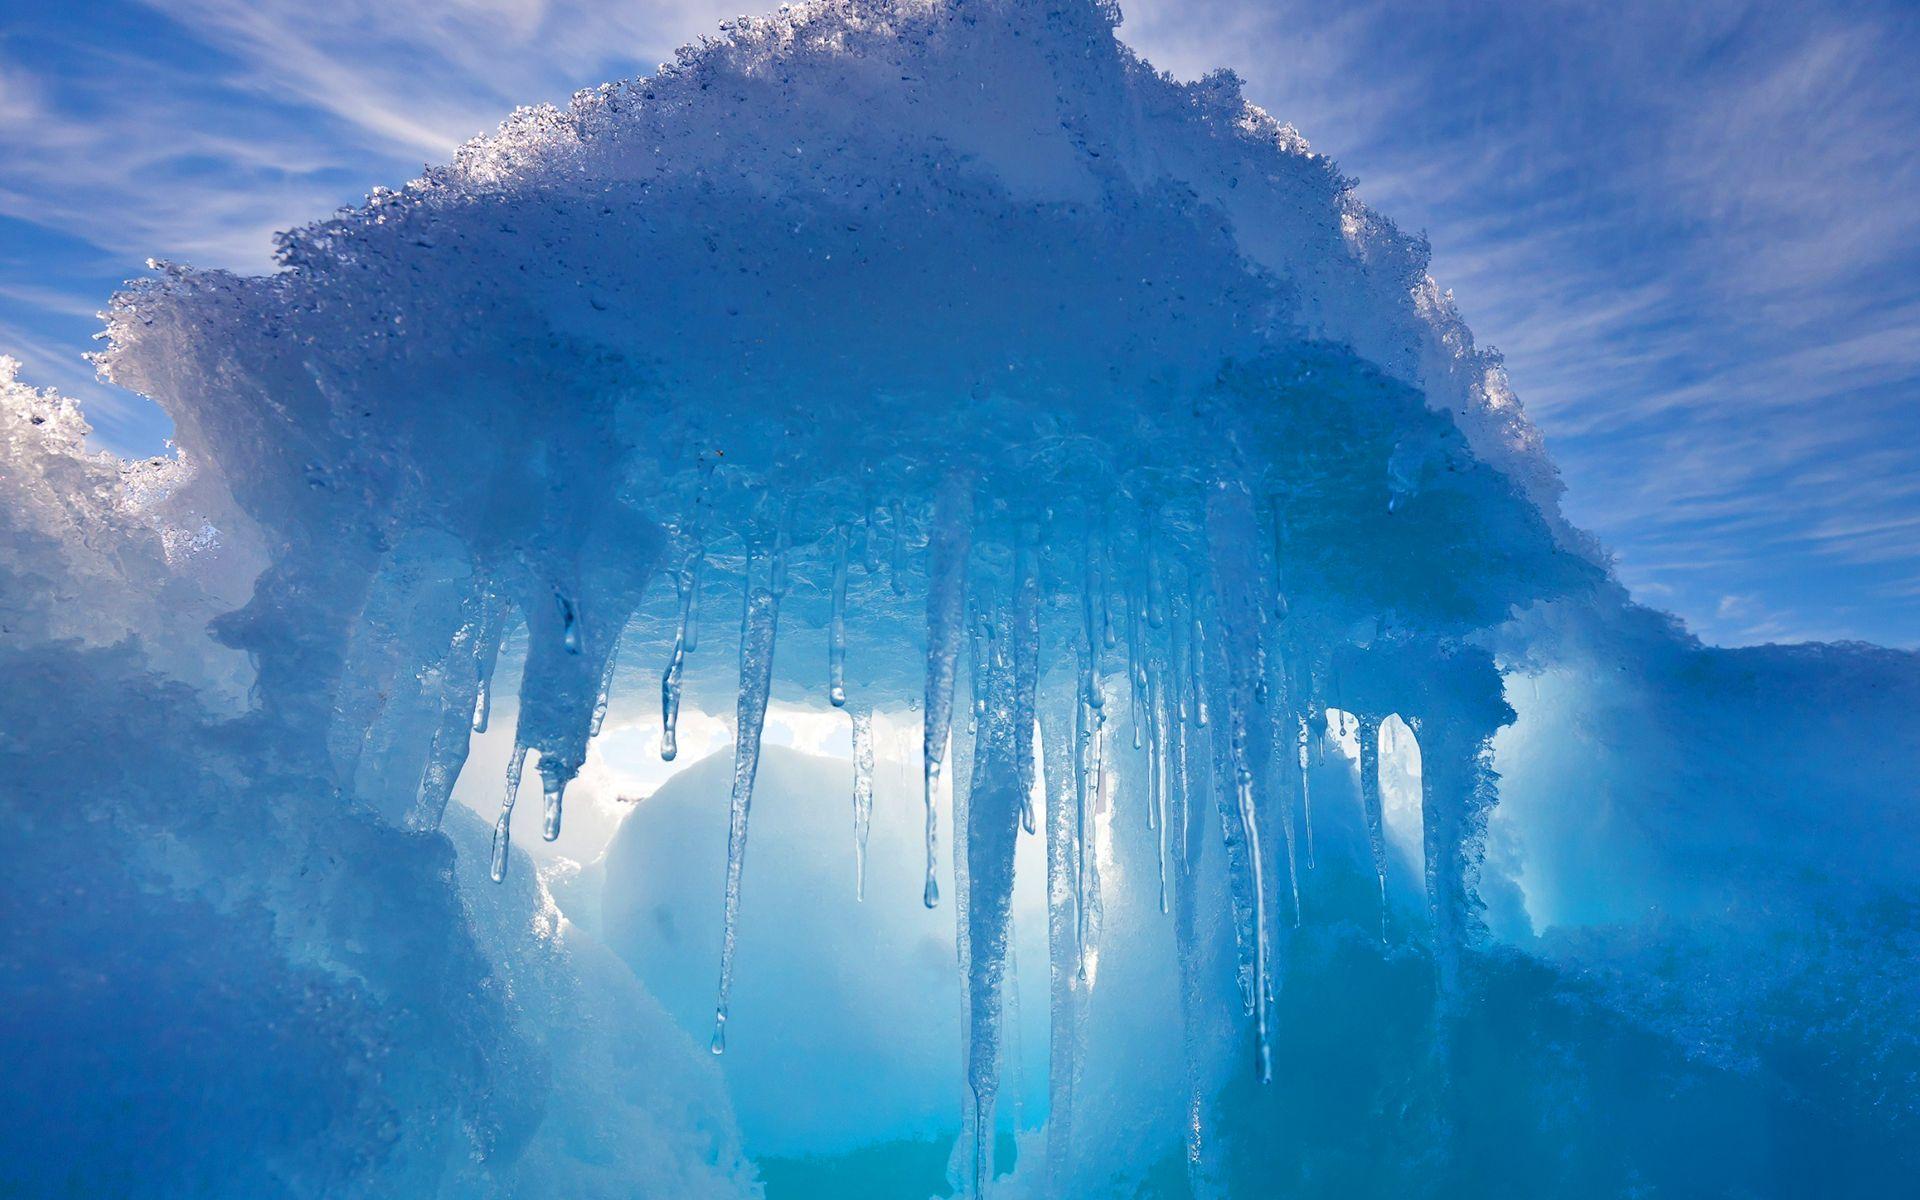 north pole ice. HD Wallpaper. Ice picture, Ice photo